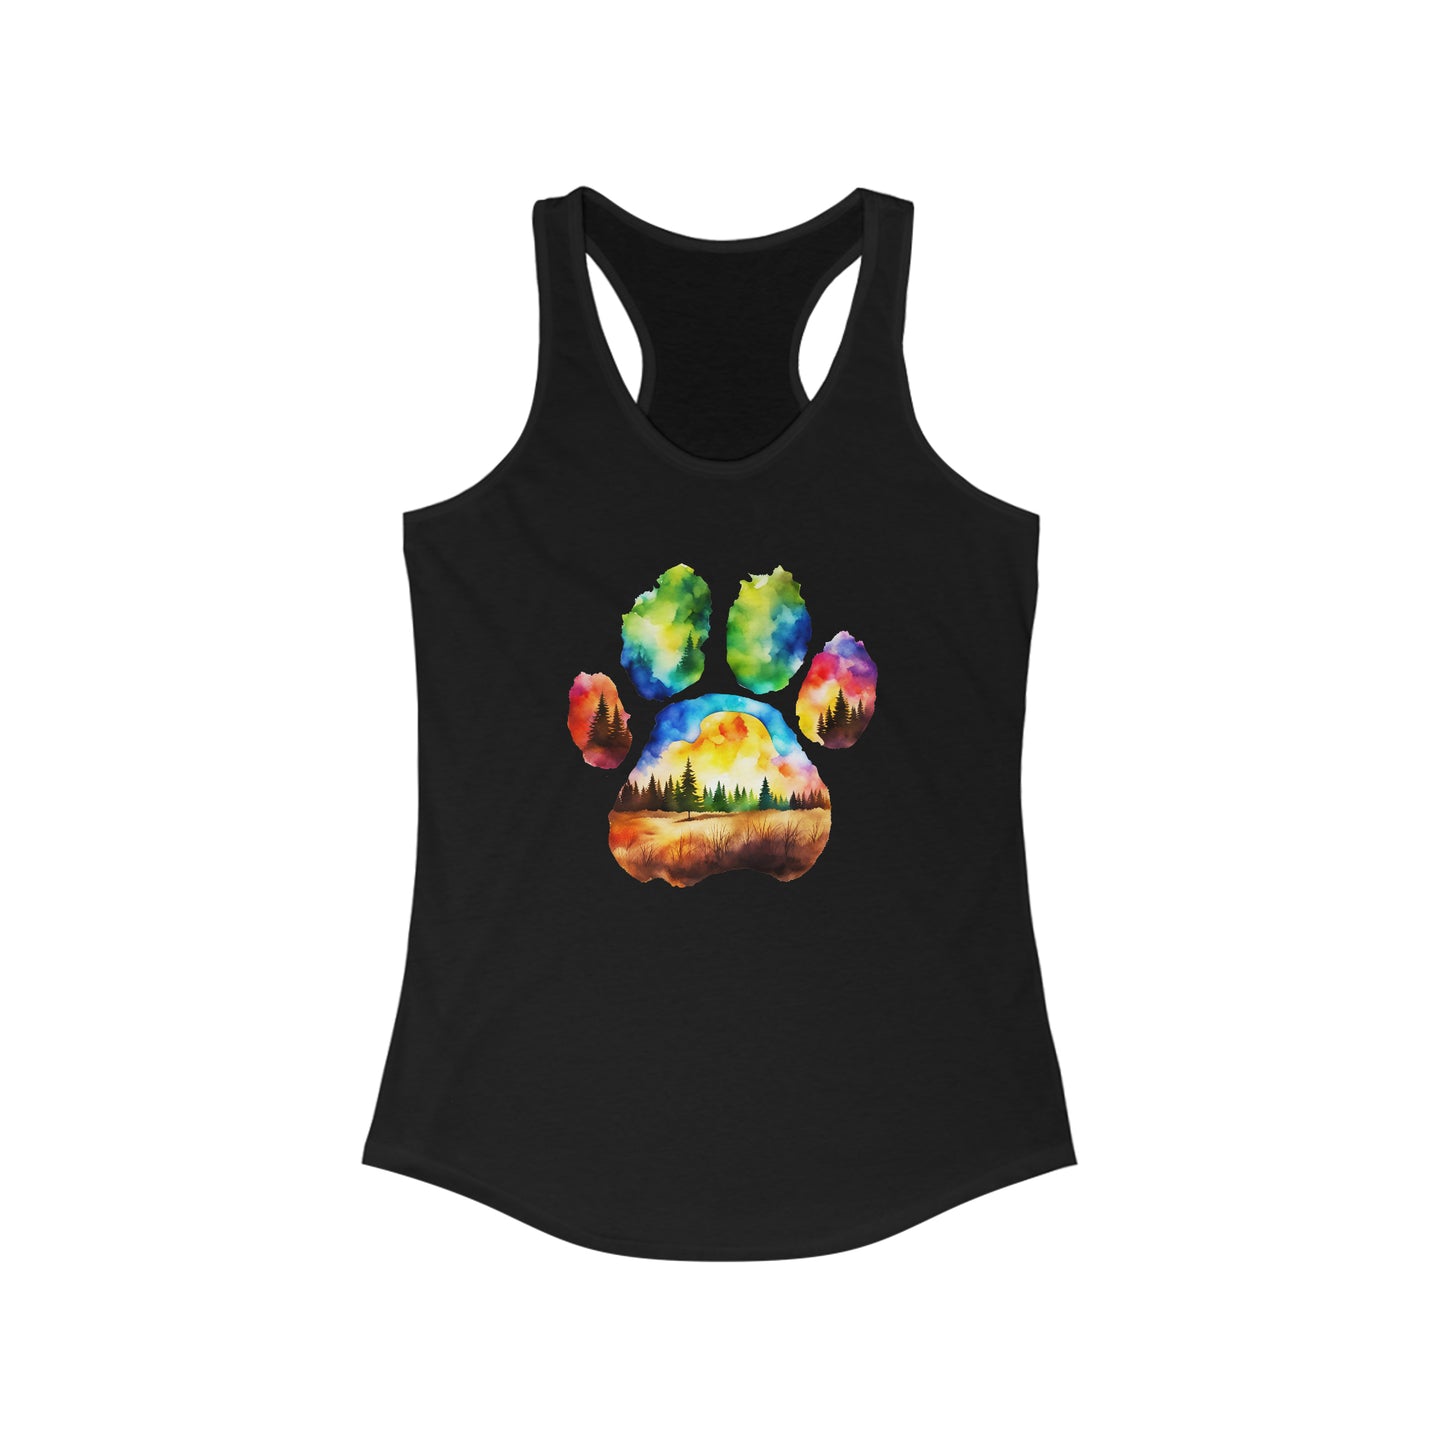 Pawsitively Adorable Women's Tank Top - Trendy Paw Print Design - Perfect Gift for Animal Lovers!